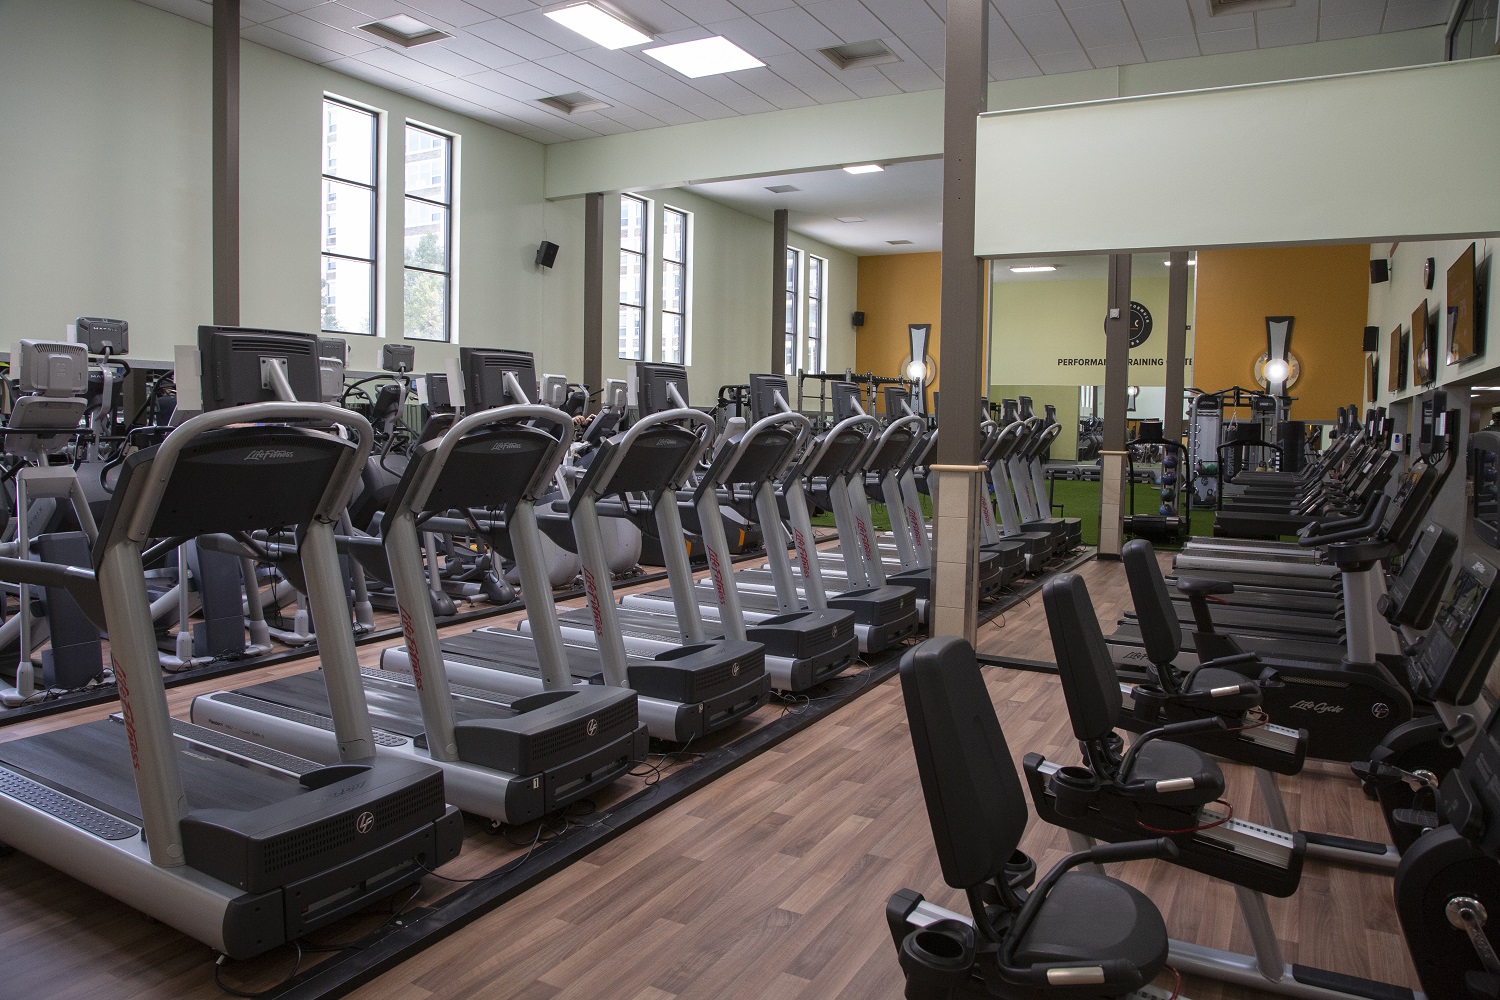 Photo of the FFC Old Town cardio machines,